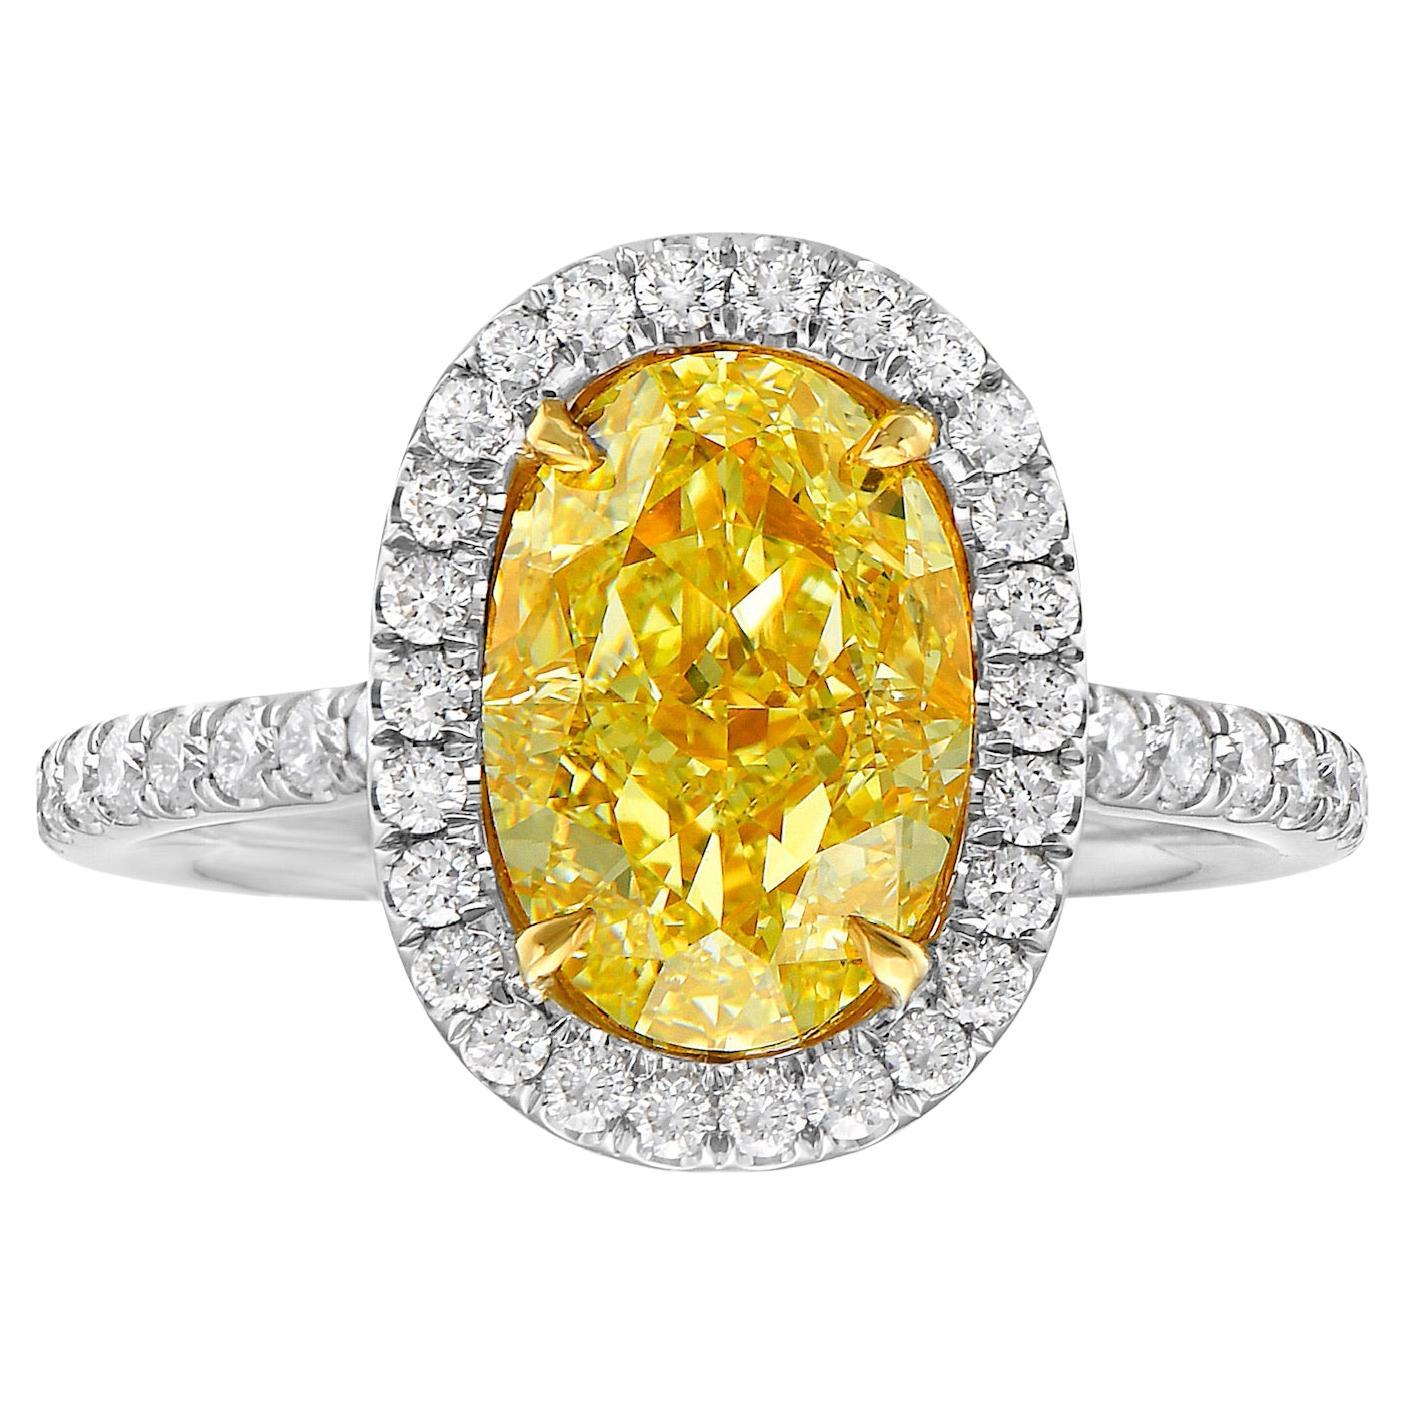 3 Carat Fancy Yellow Oval Diamond Halo Ring For Sale